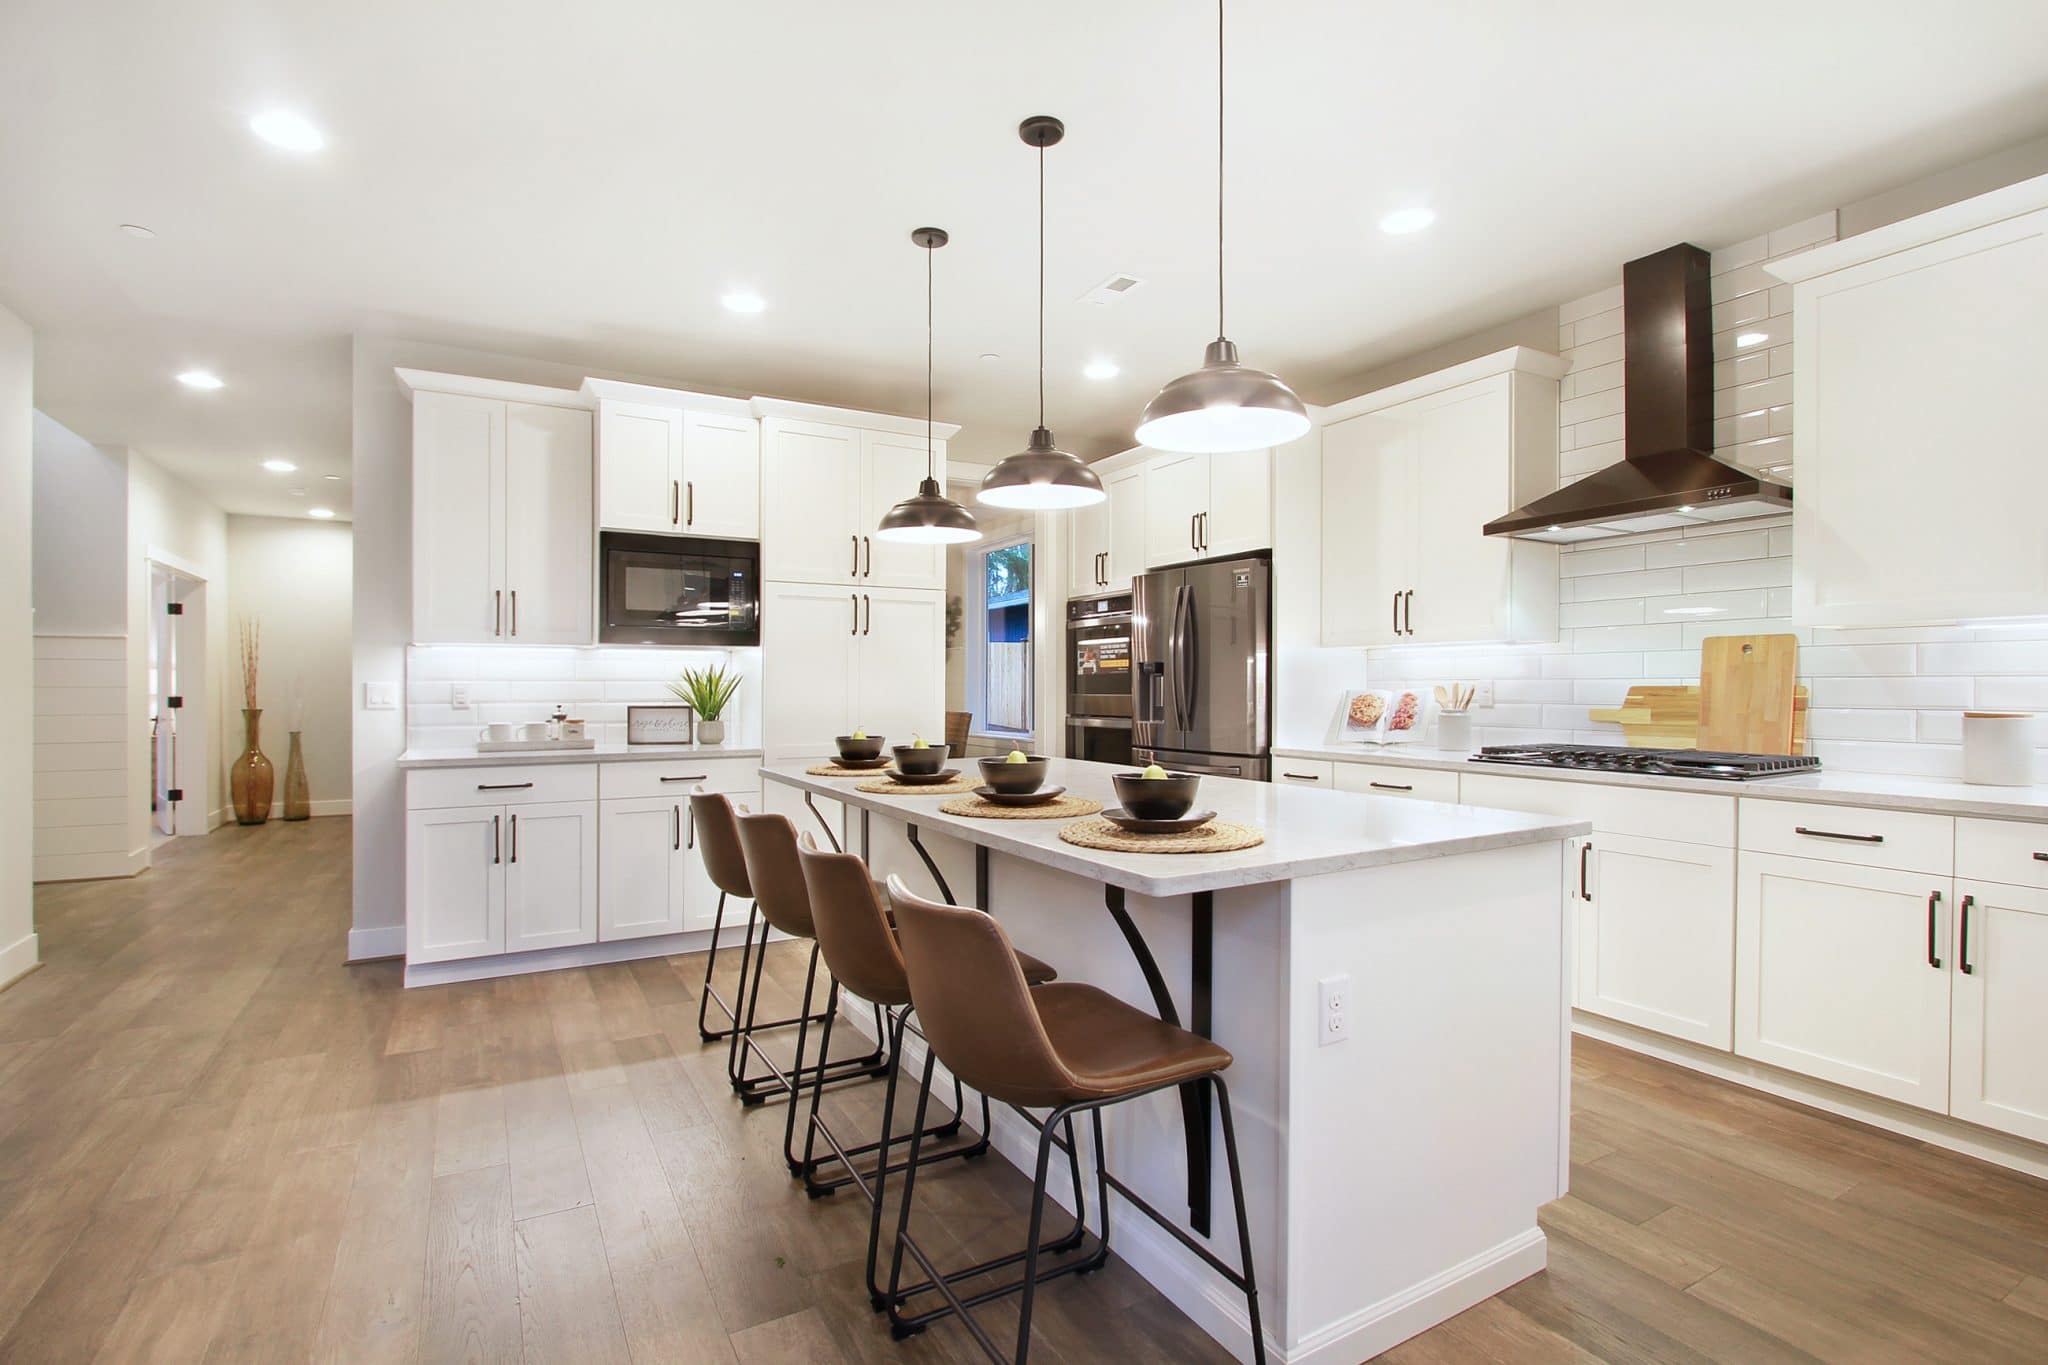 Kitchen area with dining space - home staging tips